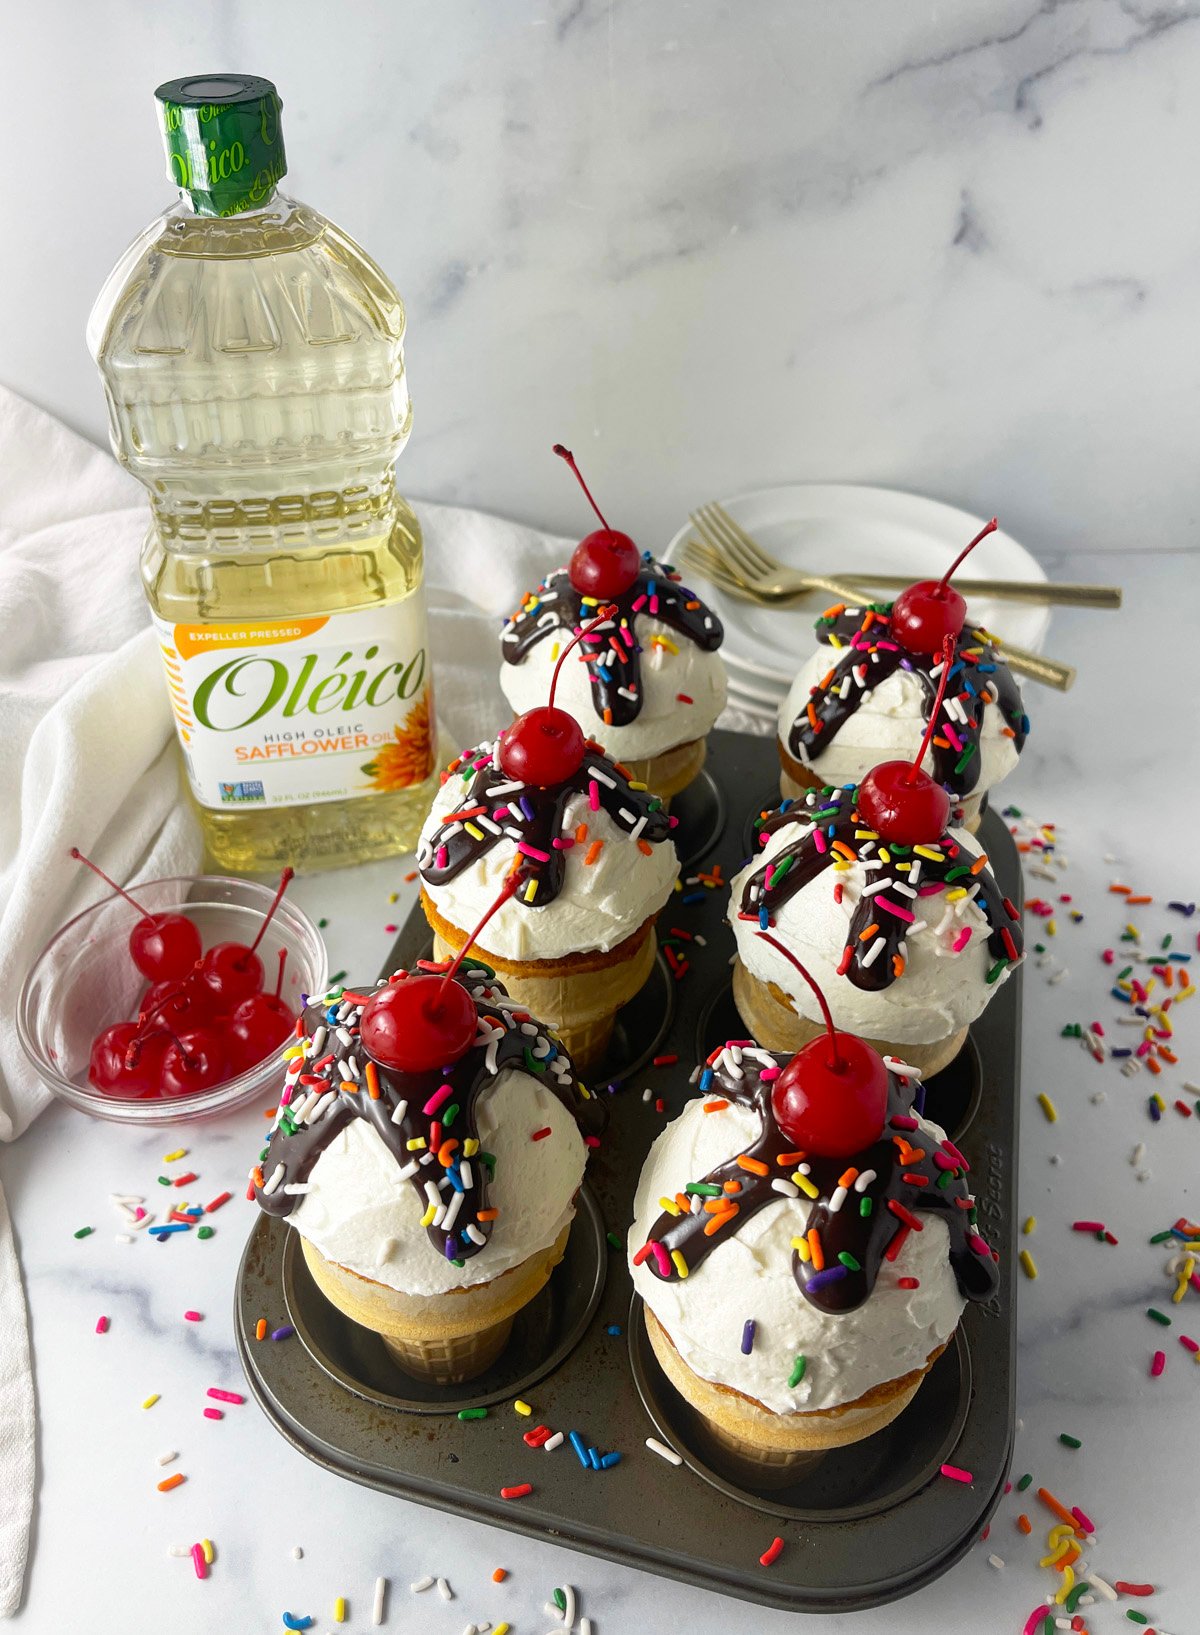 Ice cream cone cupcakes in a muffin pan with Oleico oil bottle in background.